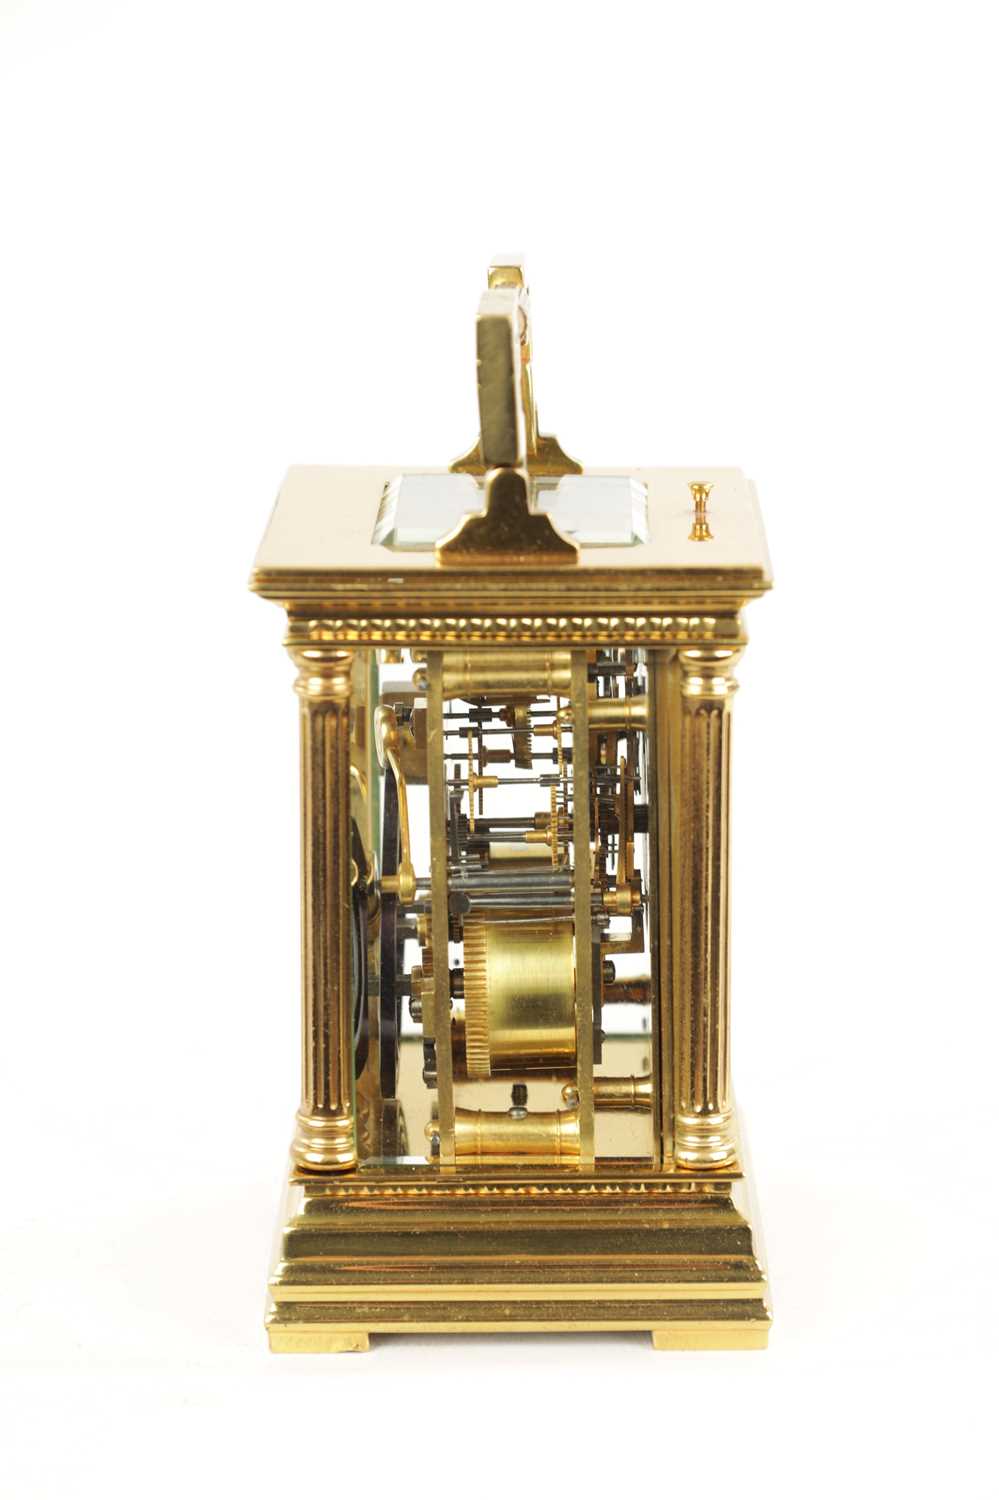 A LATE 19TH CENTURY FRENCH BRASS REPEATING CARRIAGE CLOCK - Image 9 of 9